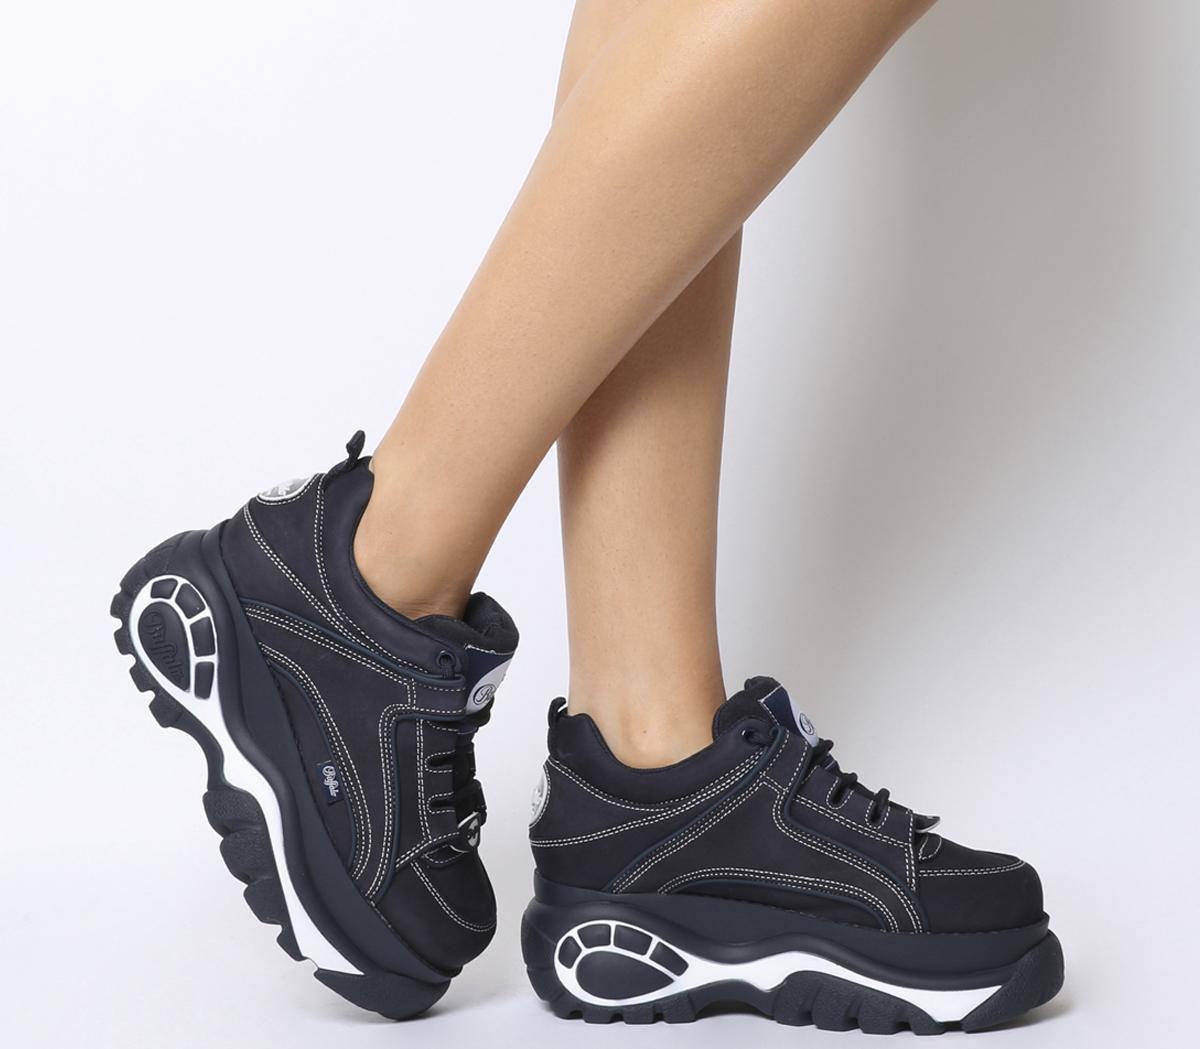 90s chunky trainers